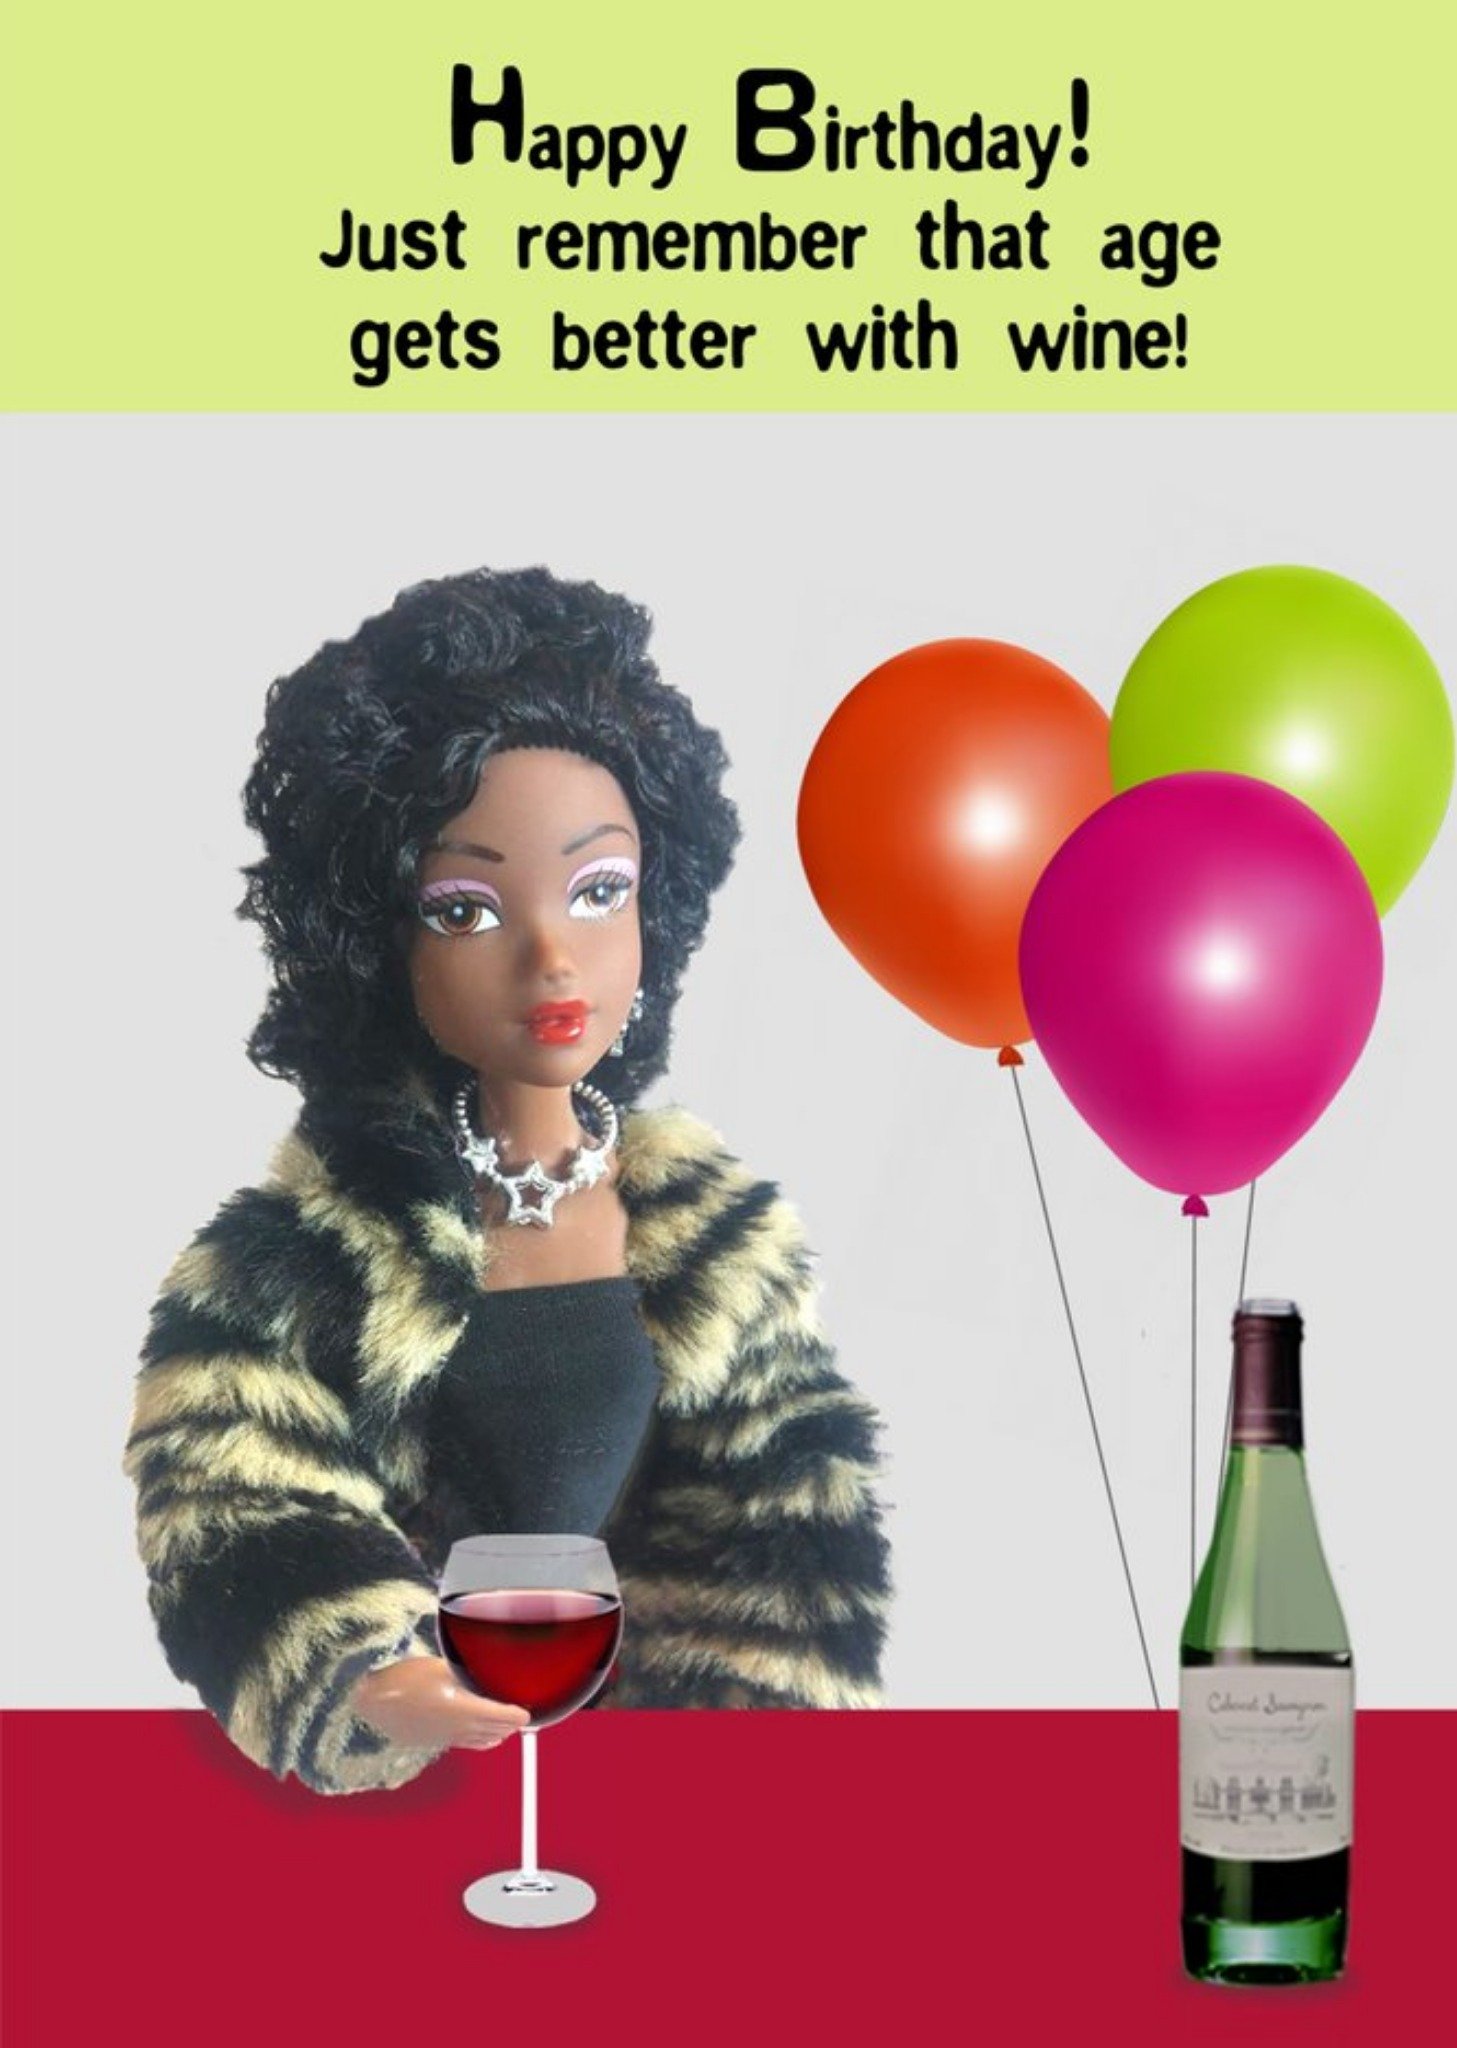 Go La La Funny Cheeky Happy Birthday Just Remember That Age Gets Better With Wine Card Ecard